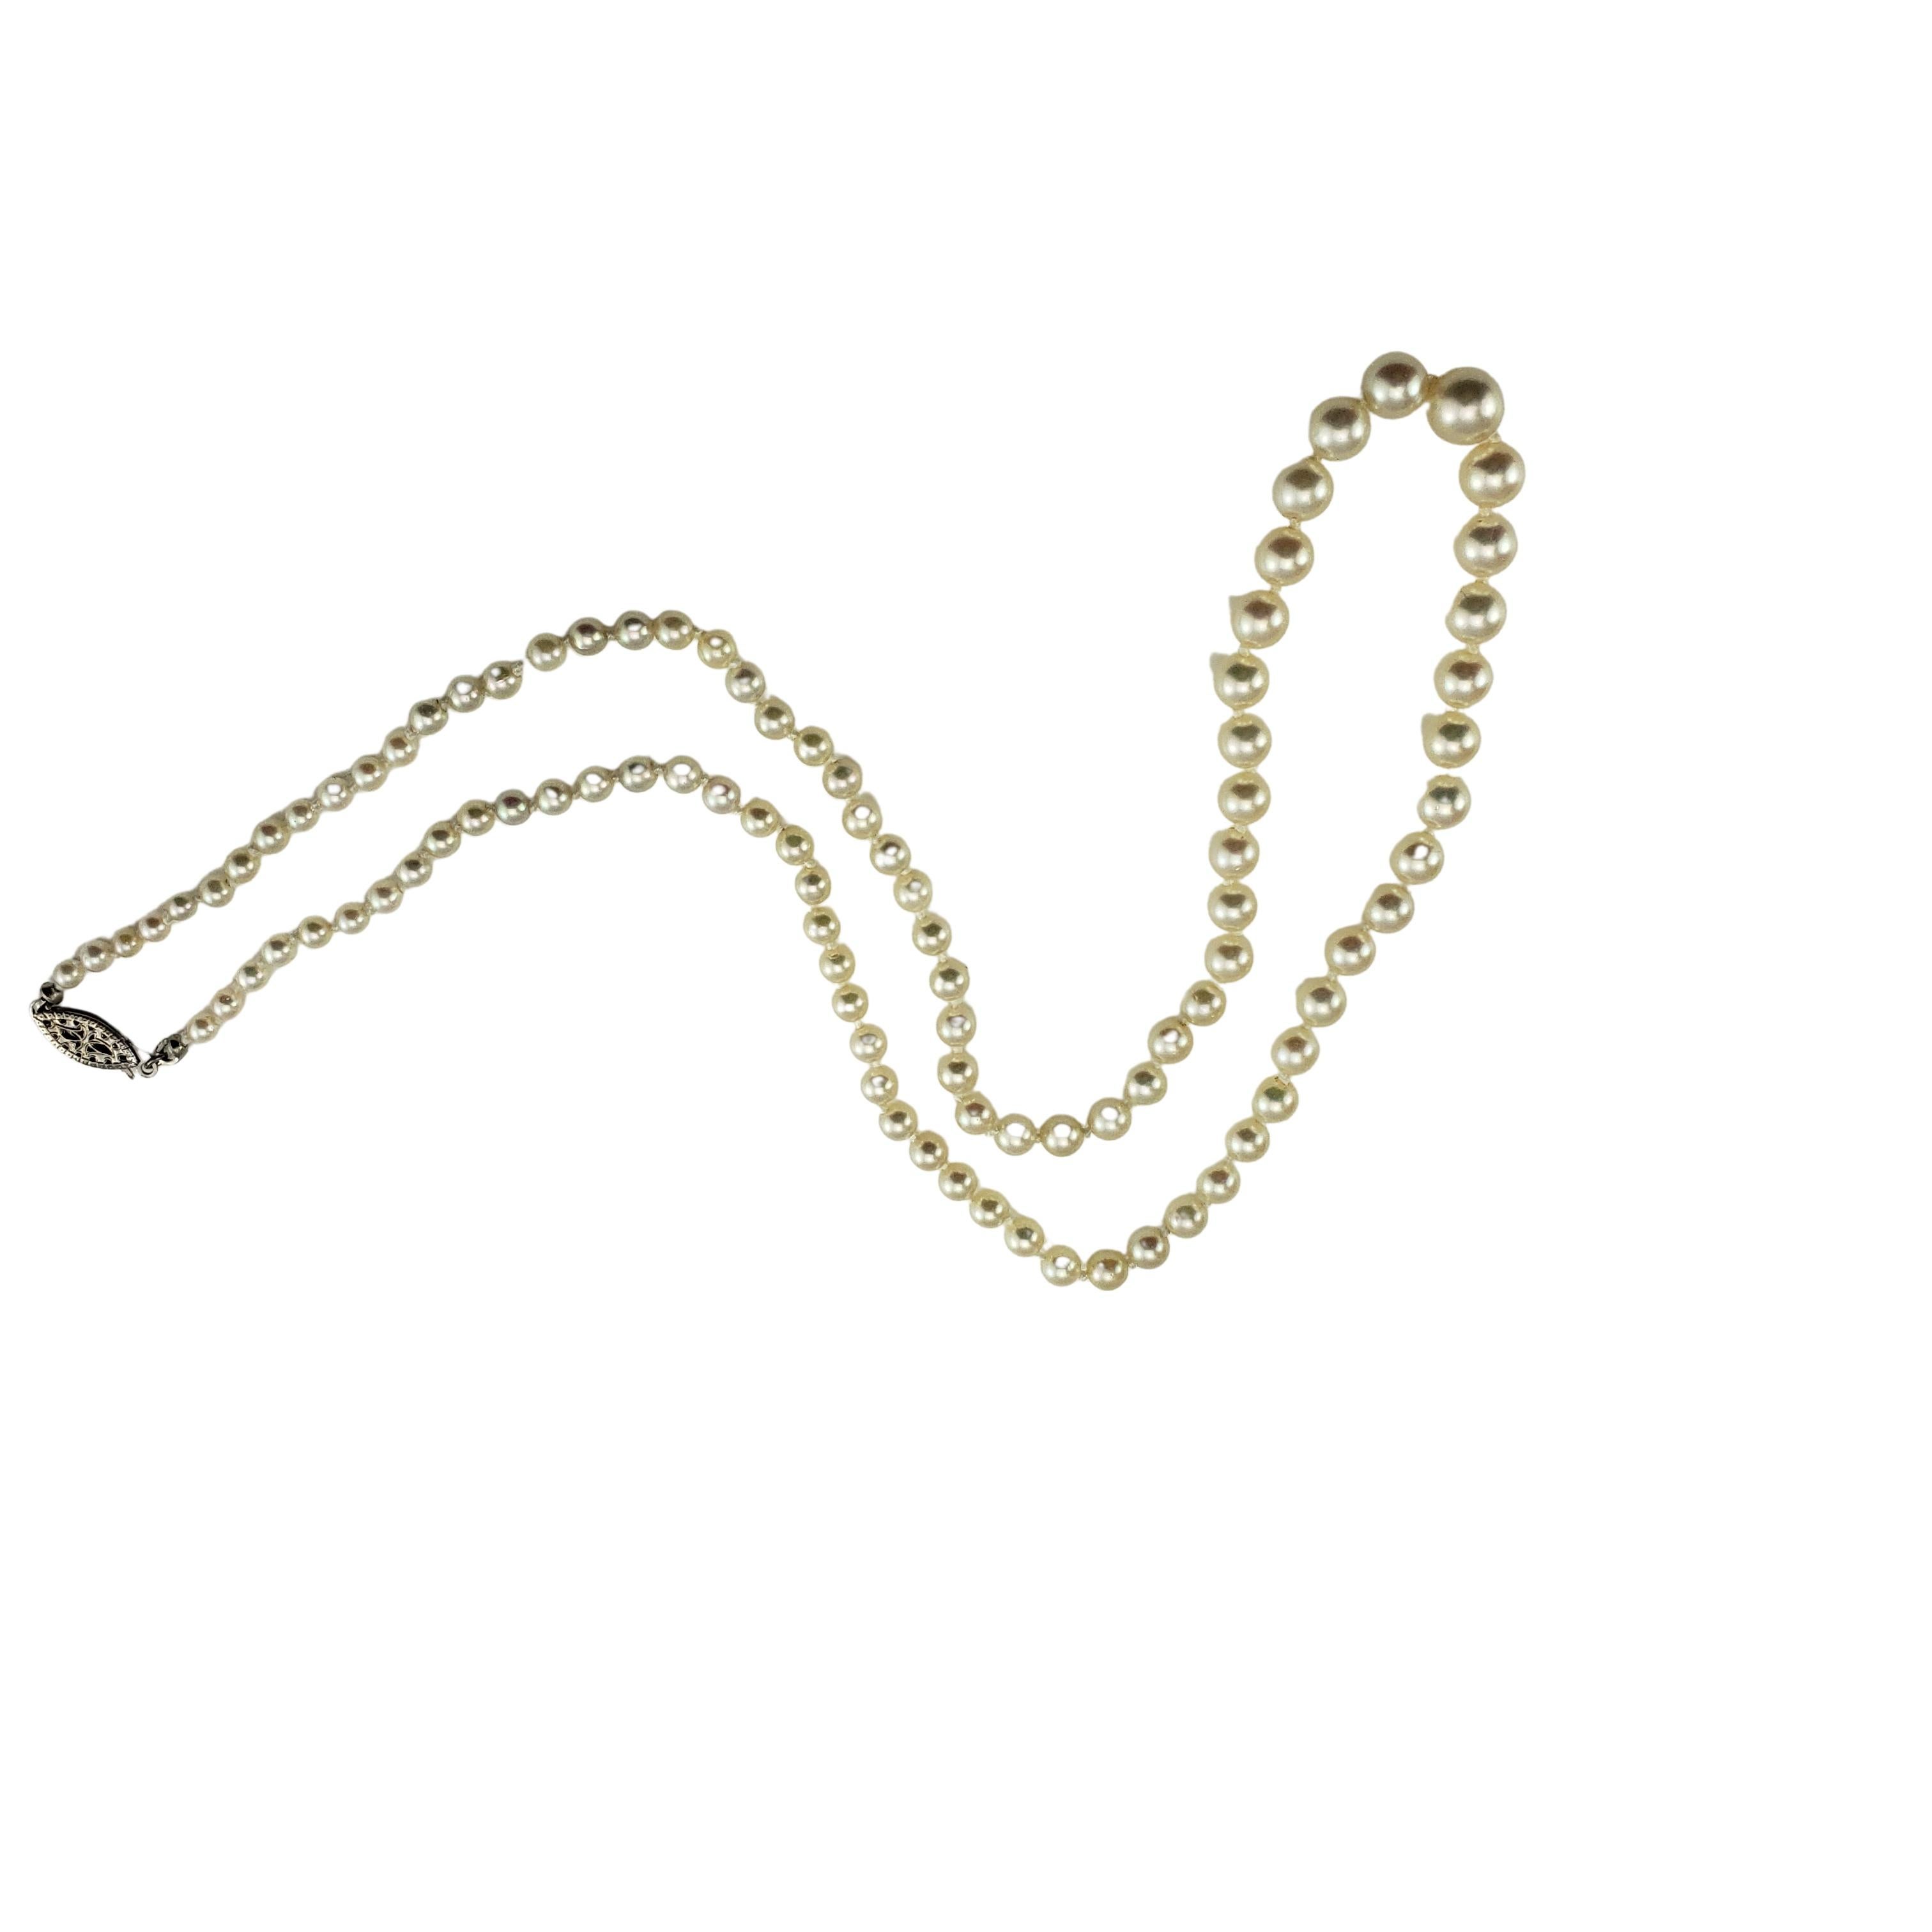 Vintage Graduated Cultured Pearl Necklace with 14 Karat White Gold Closure-

This lovely necklace features 97 graduated white cultured pearls (3 mm - 7 mm) with a classic 14K white gold closure. 
Individually knotted, just restrung.

Size: 19.5